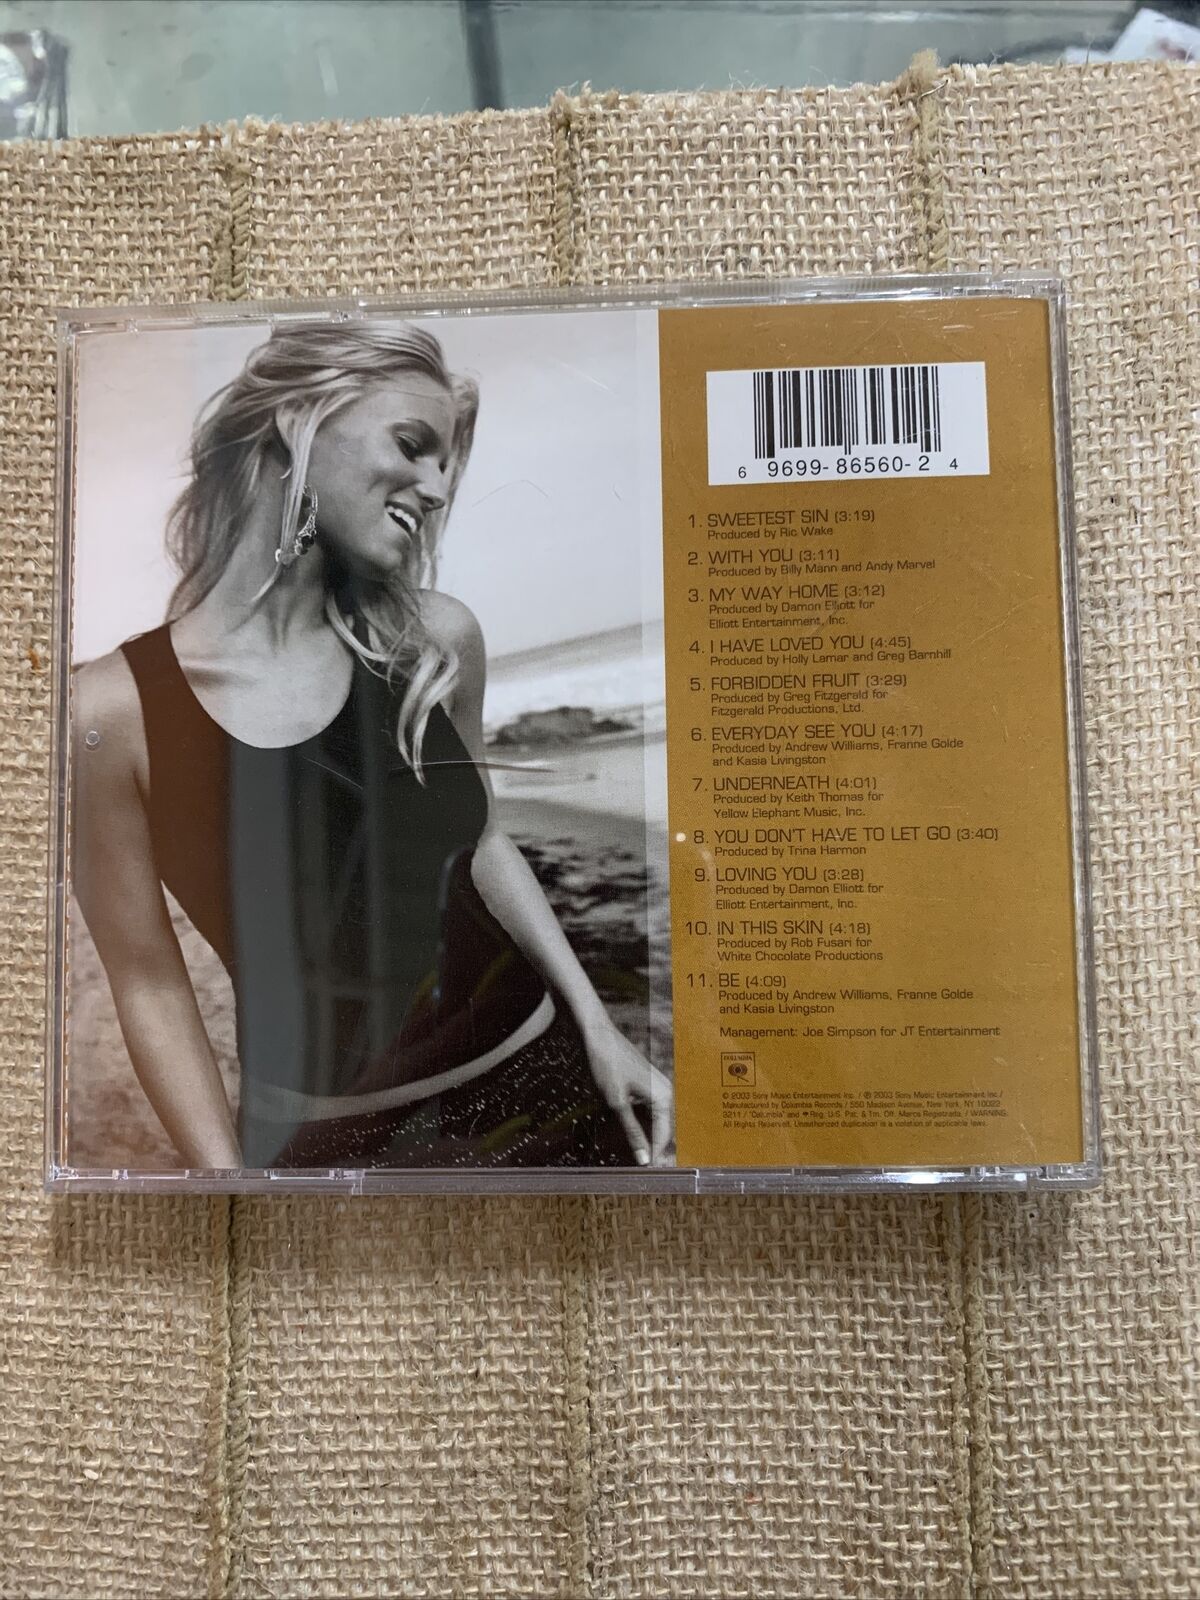 Jessica Simpson In This Skin CD